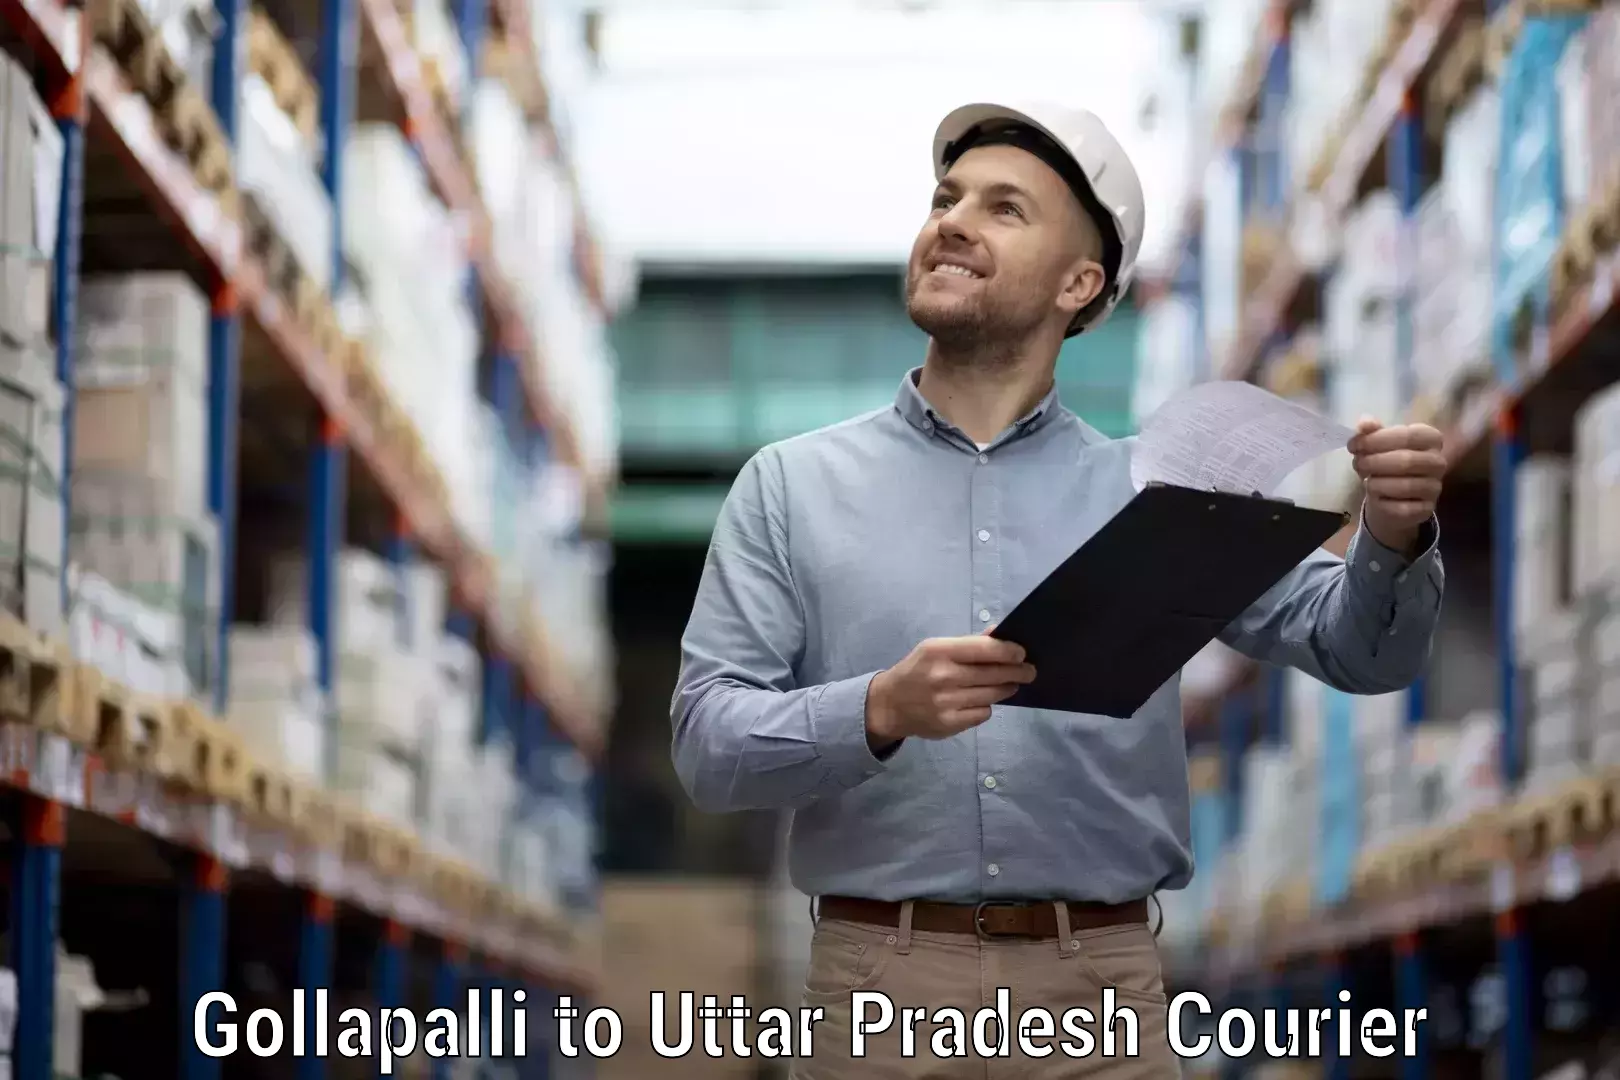 Fast delivery service Gollapalli to Sahaswan